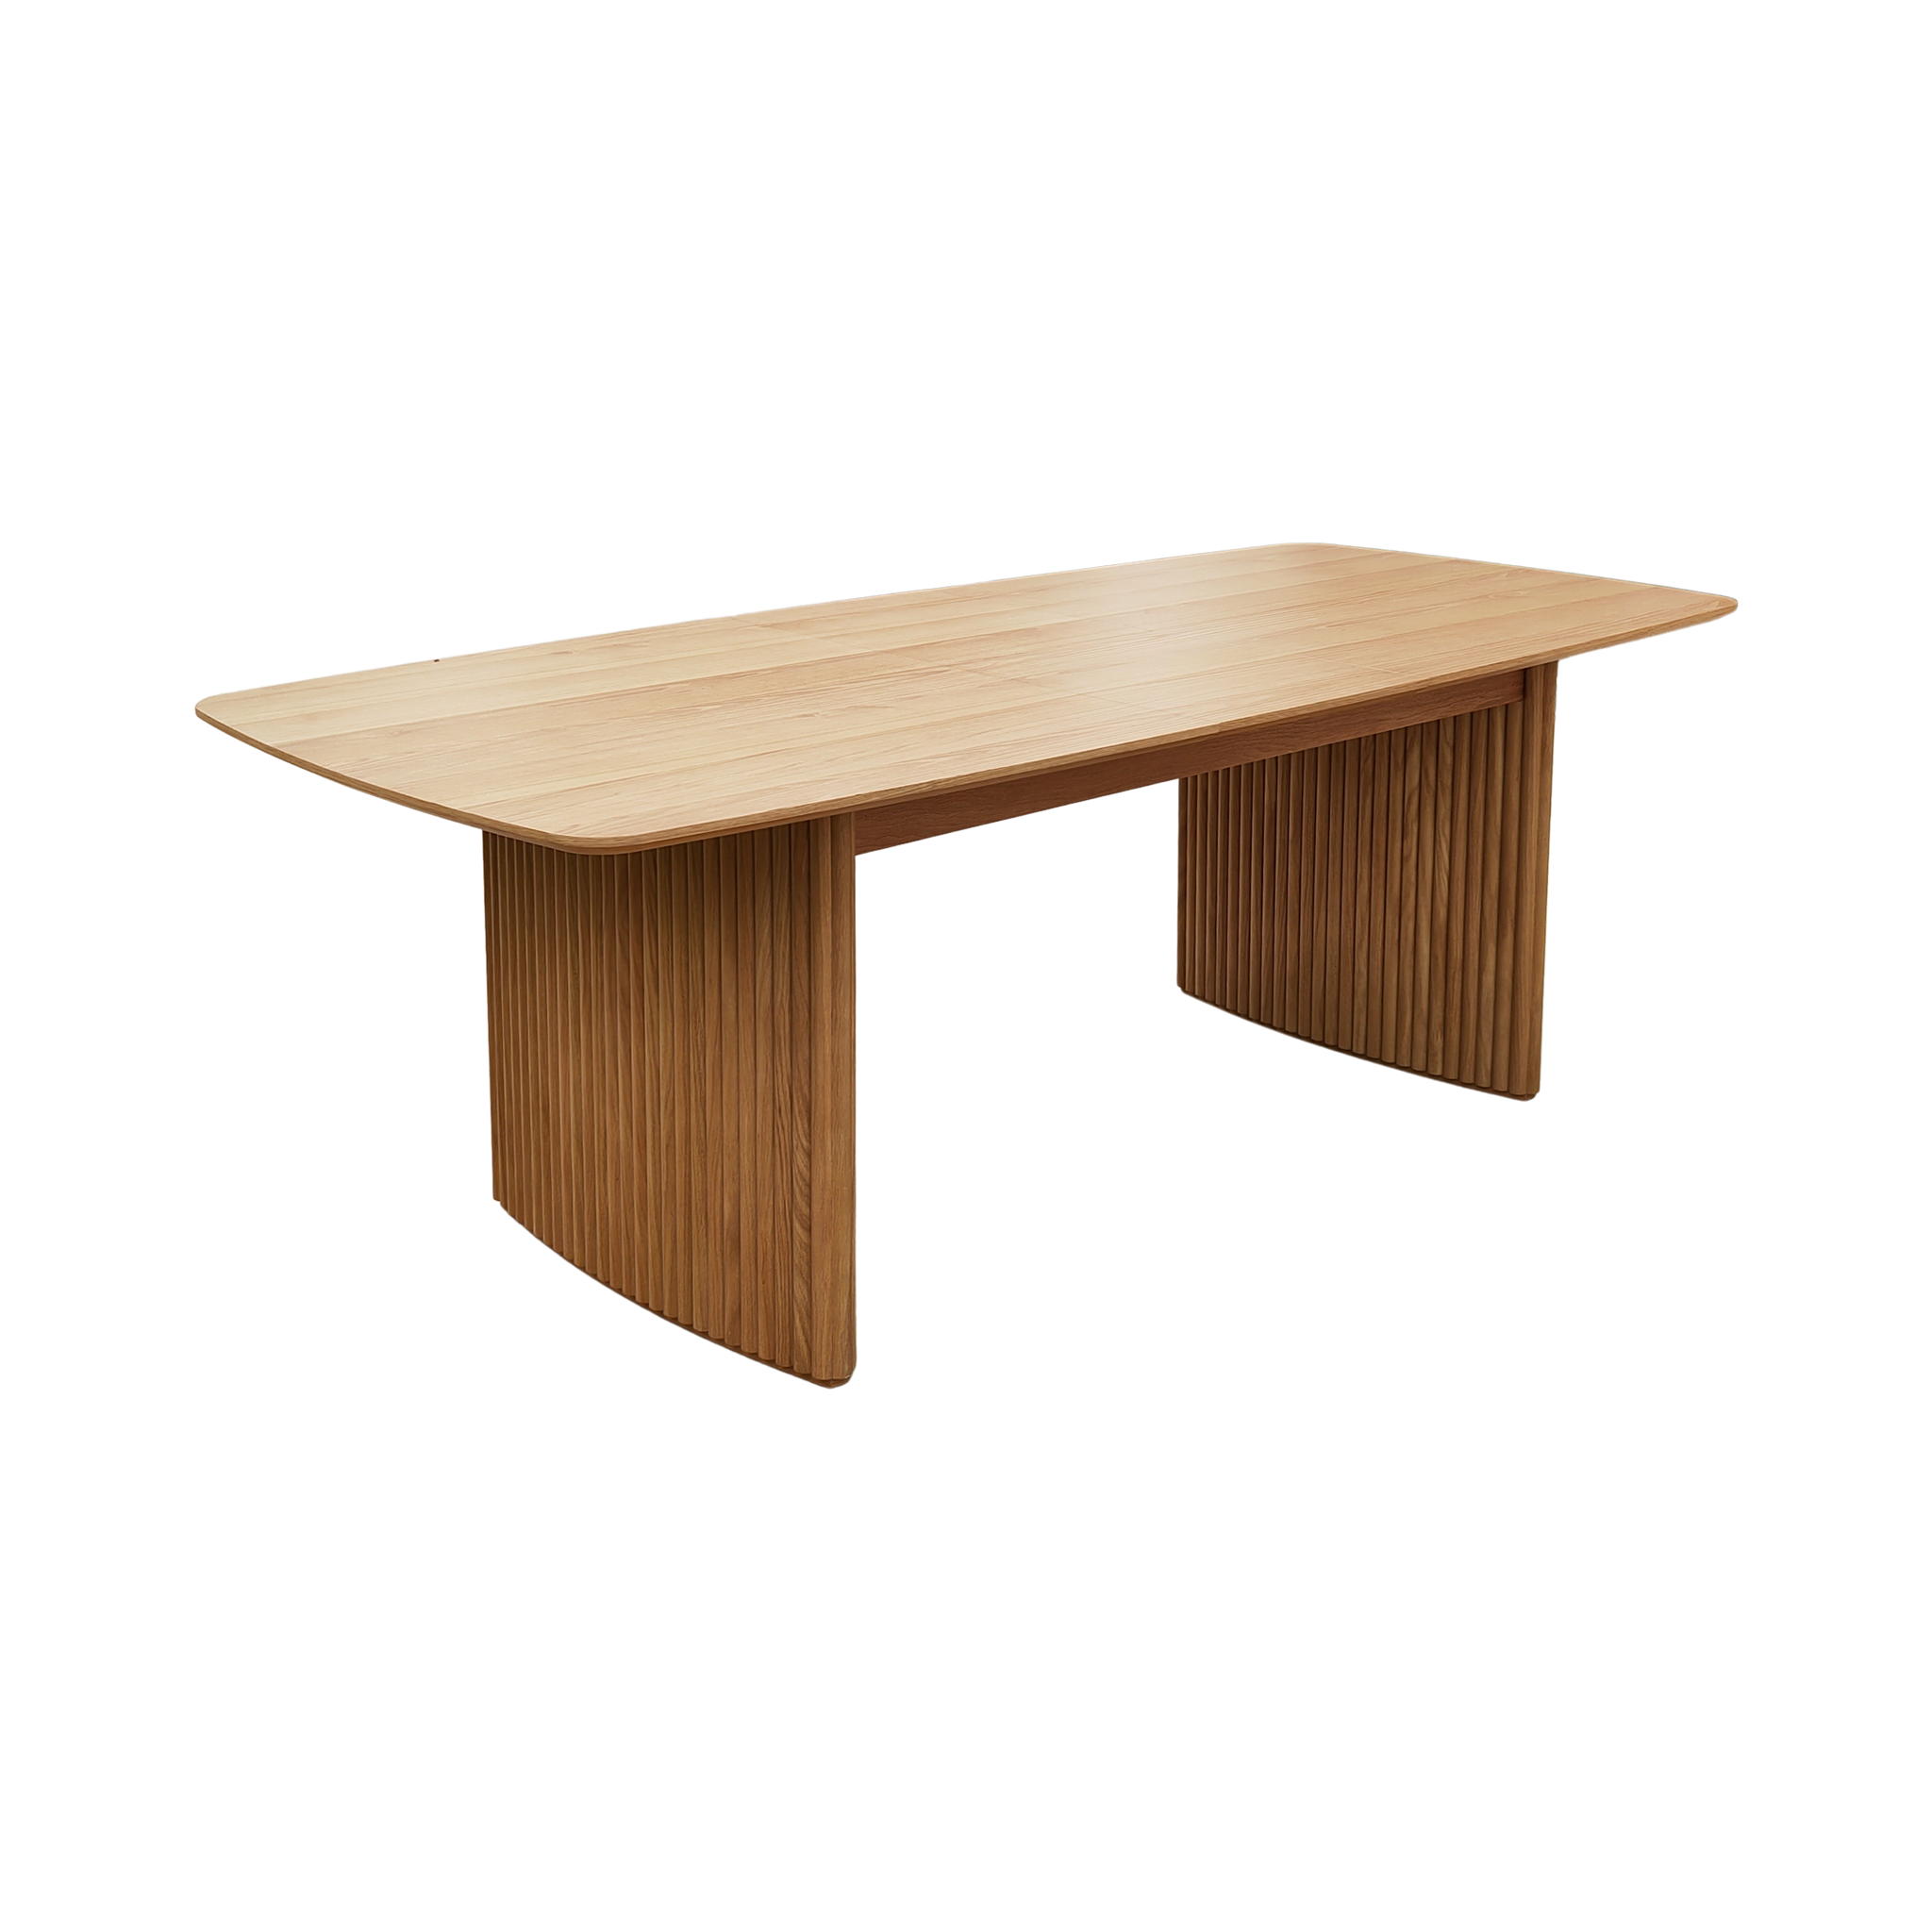 87658 CANE Extending table